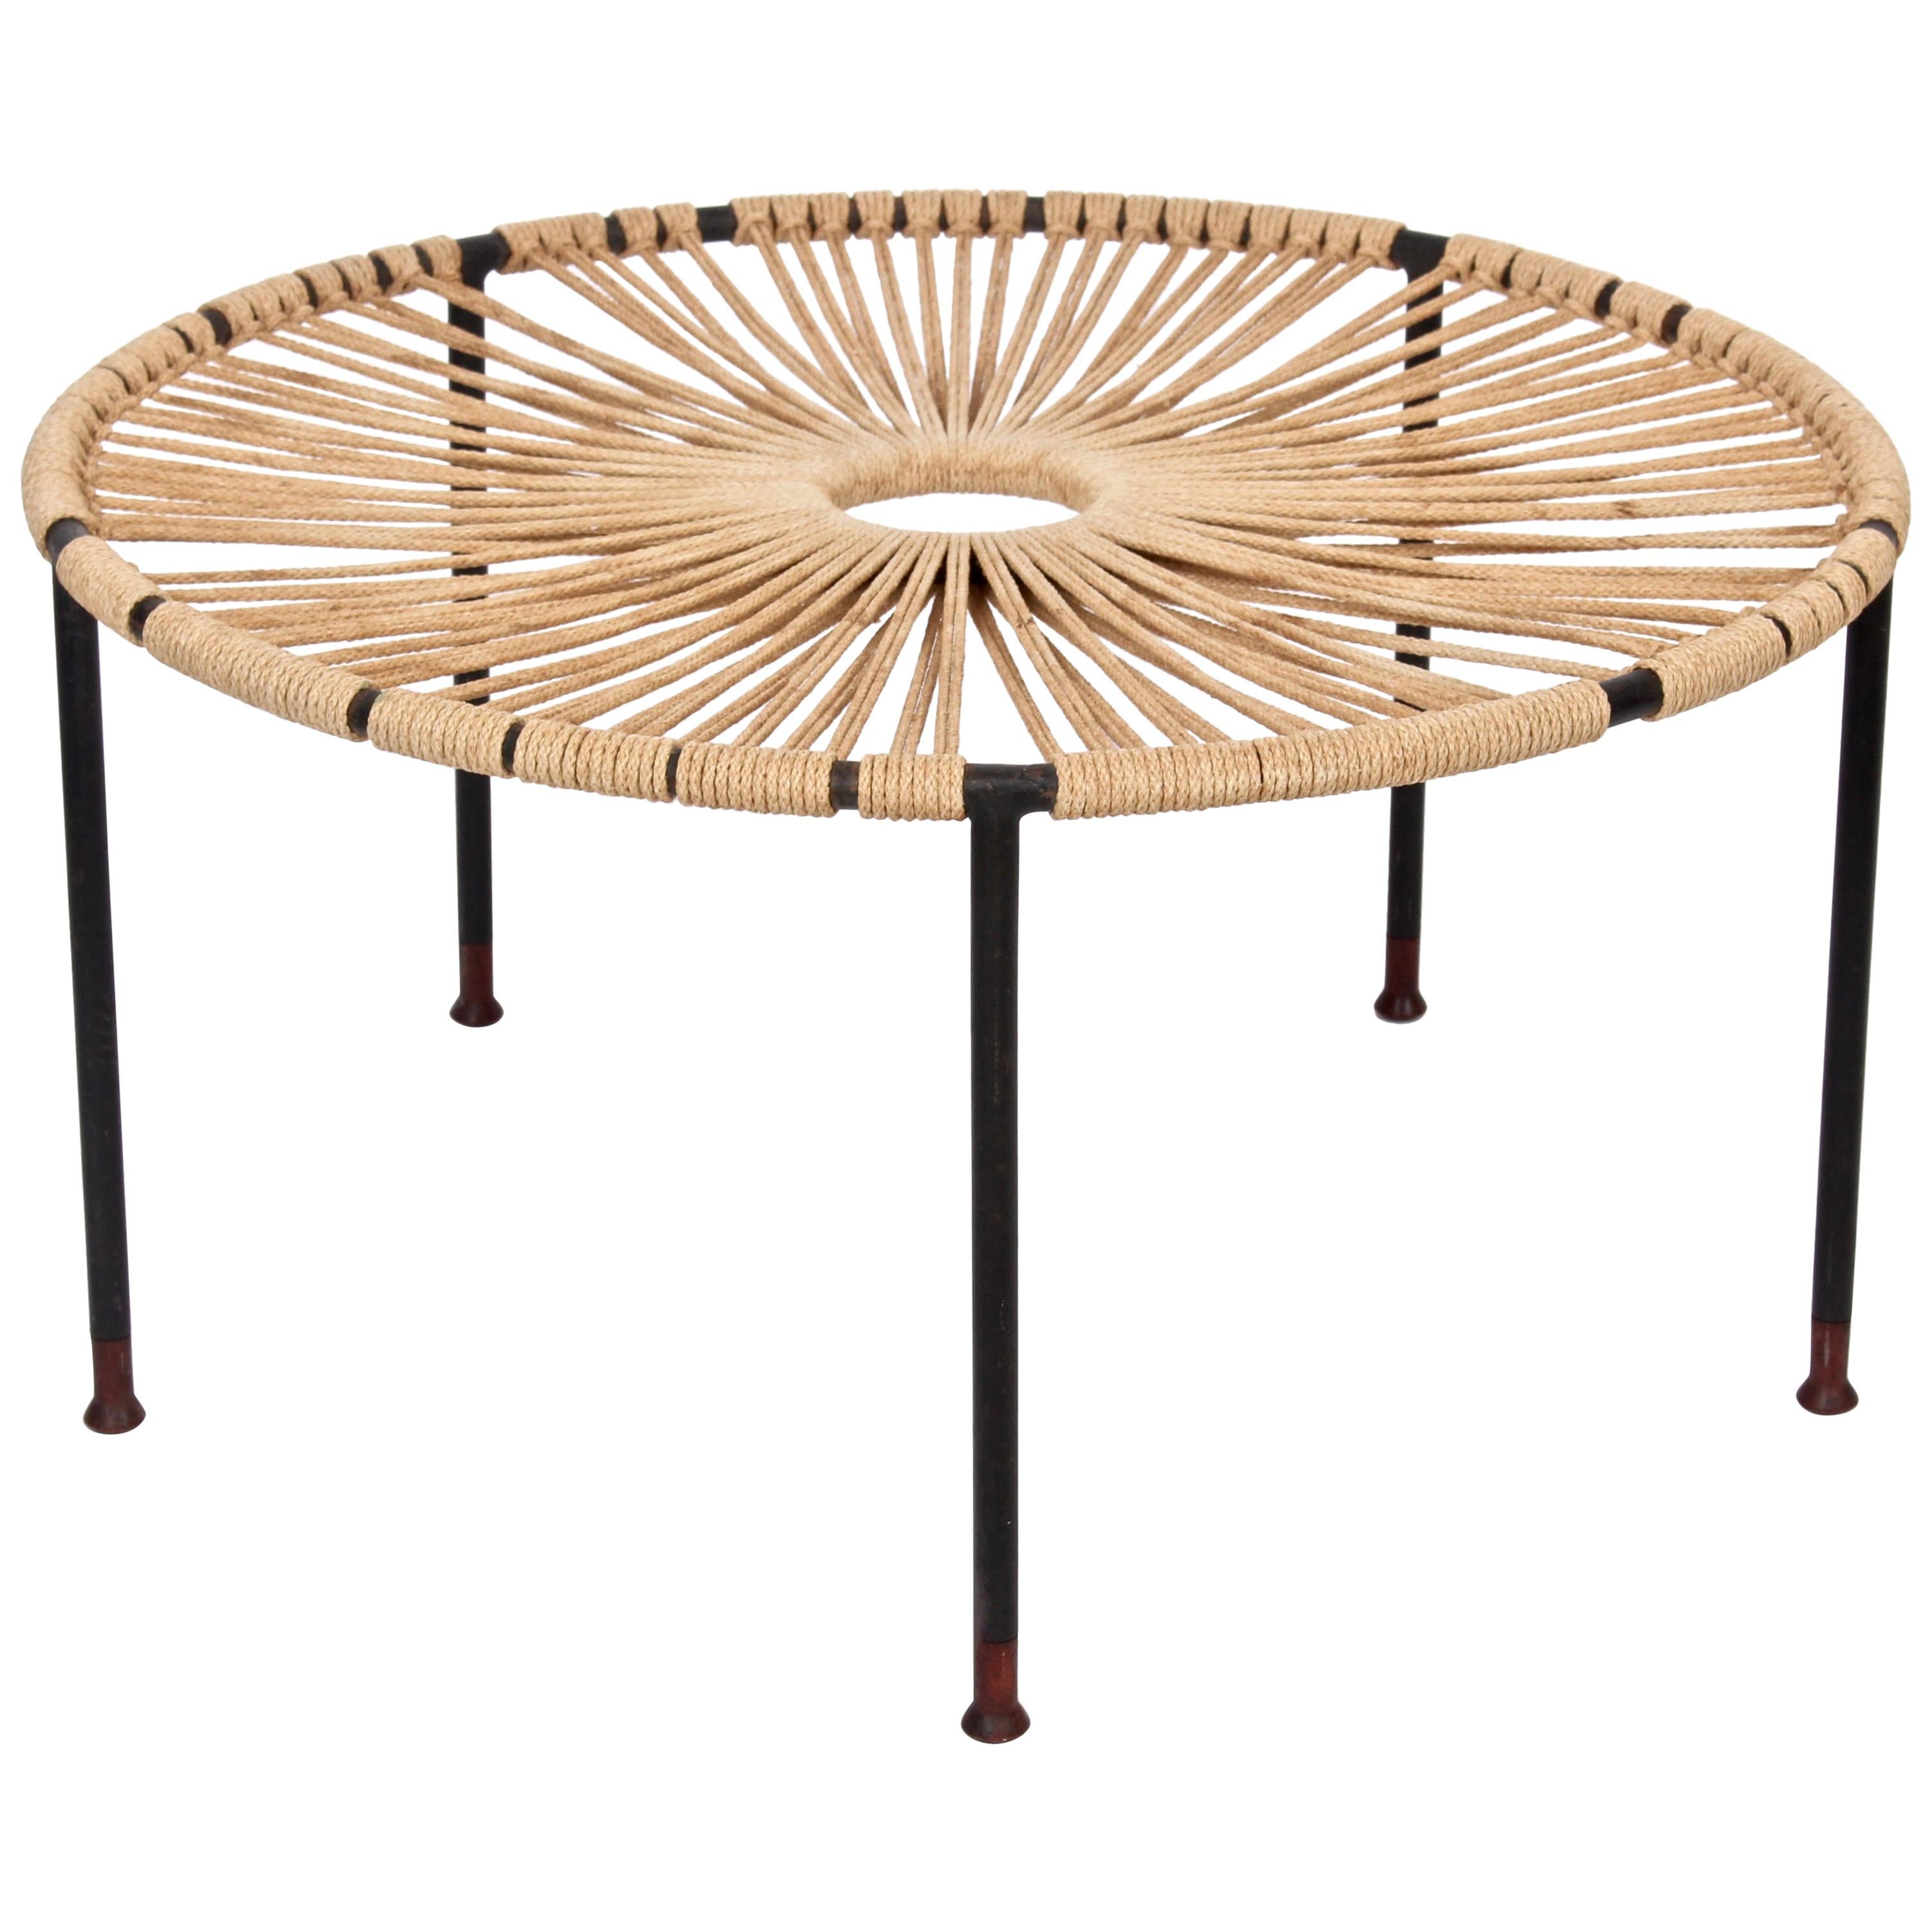 Wrought Iron, Woven Hemp Rope and Teak Footed Catchall, Table 1950s